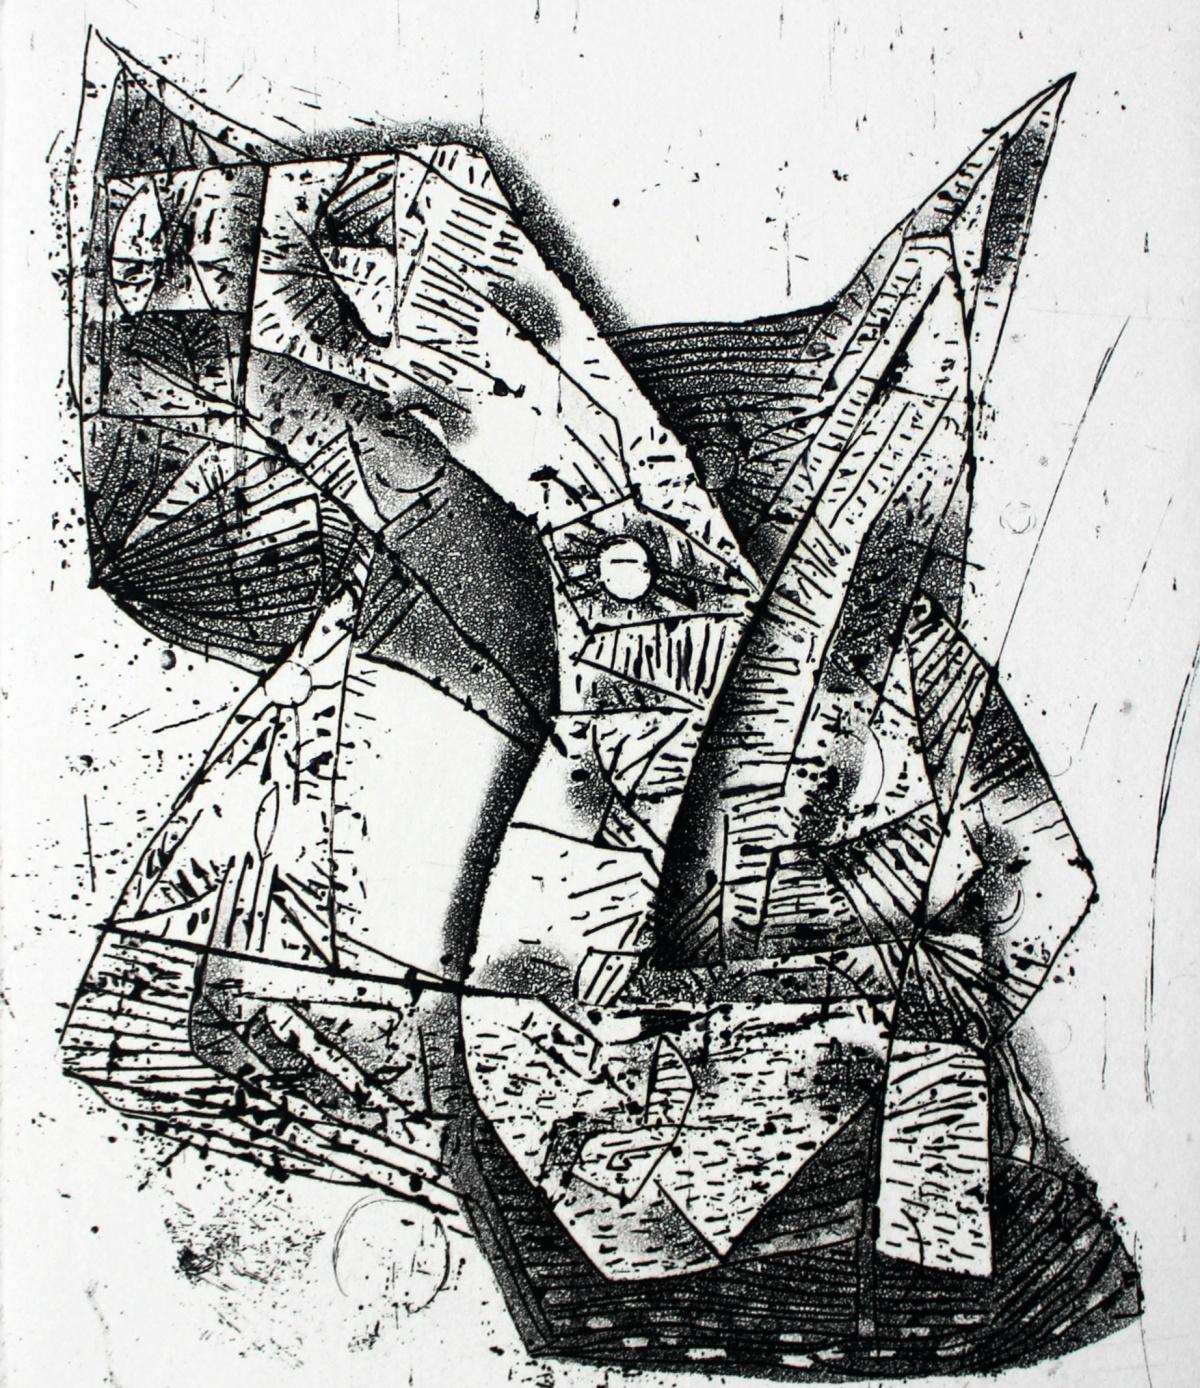 In a bath - 21st Century, Contemporary Abstract Etching, Black and White